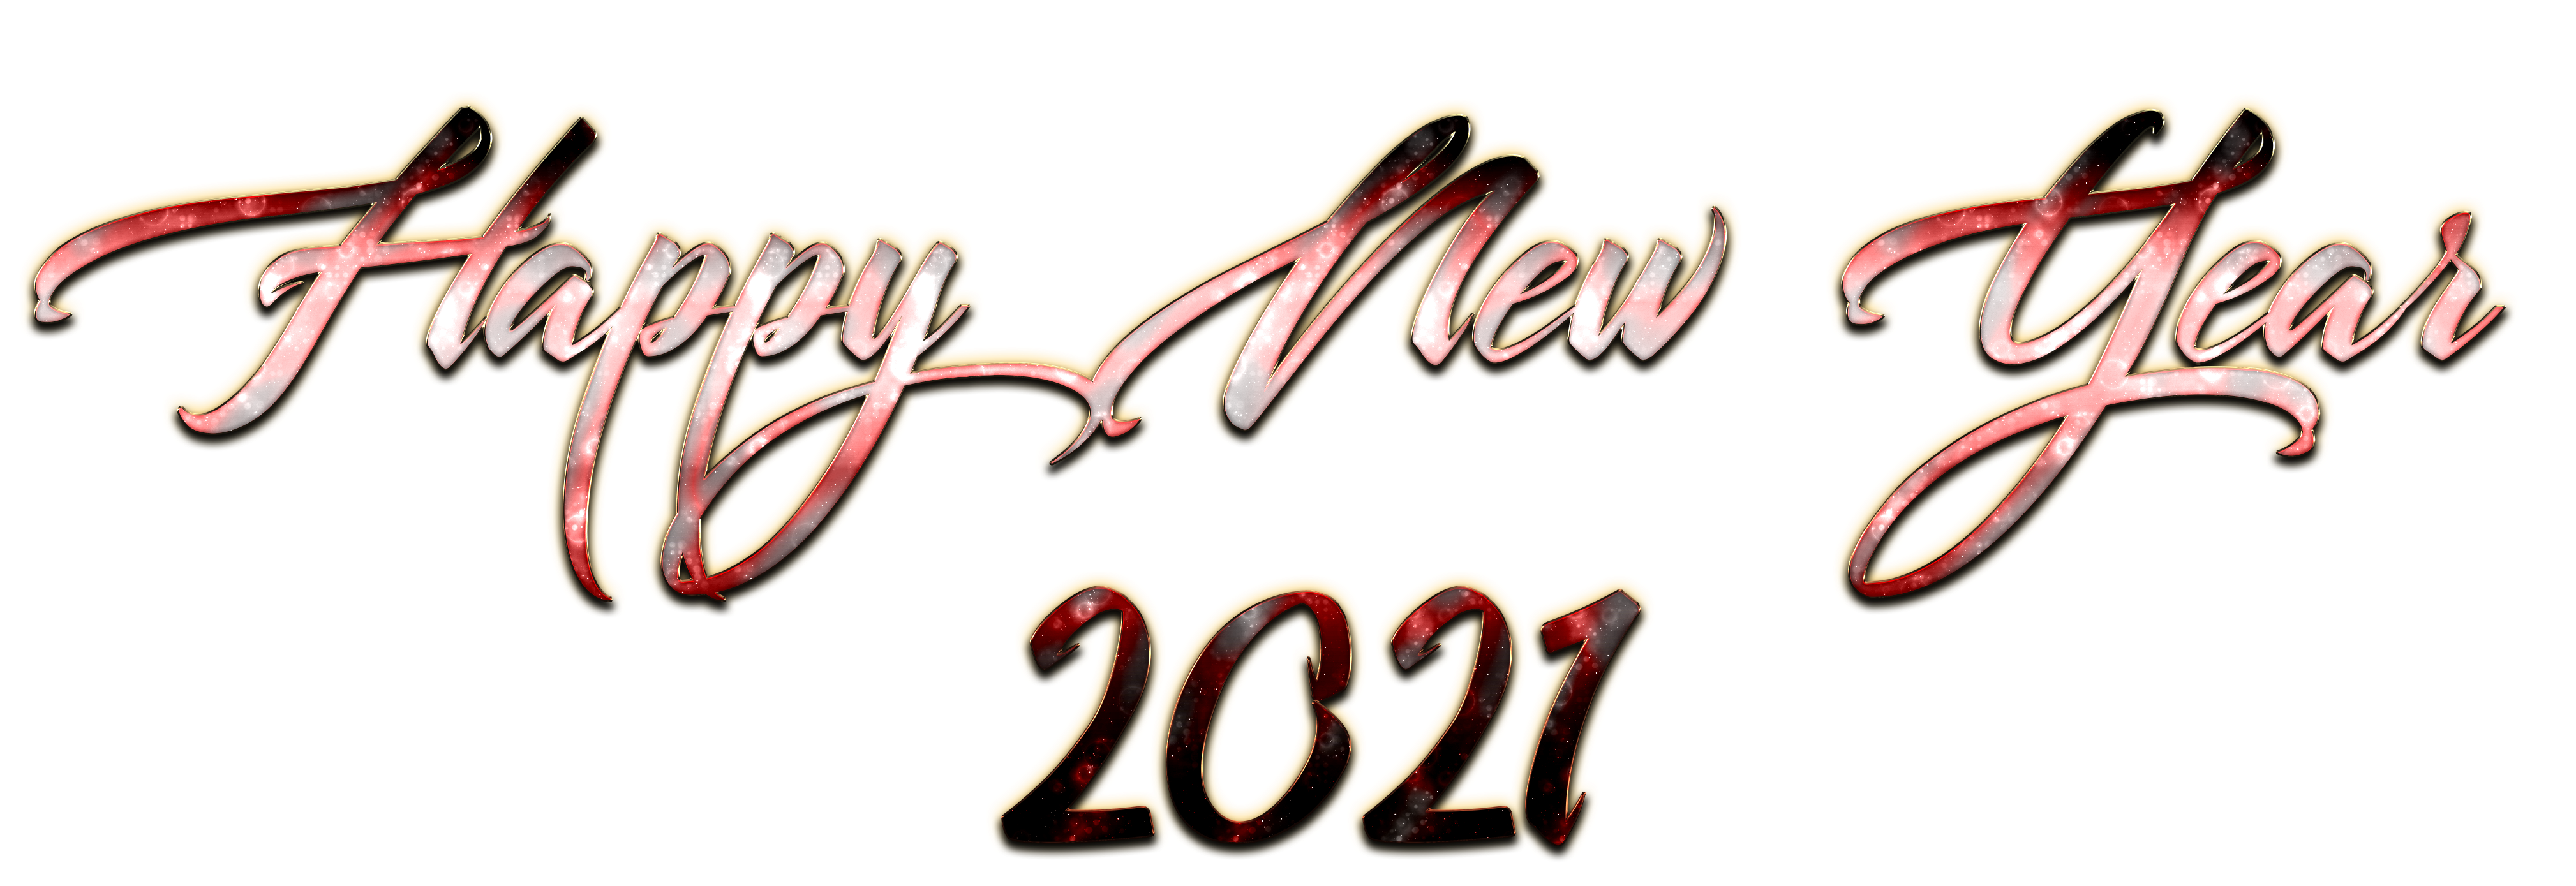 Happy New Year 2021 PNG High Quality Image